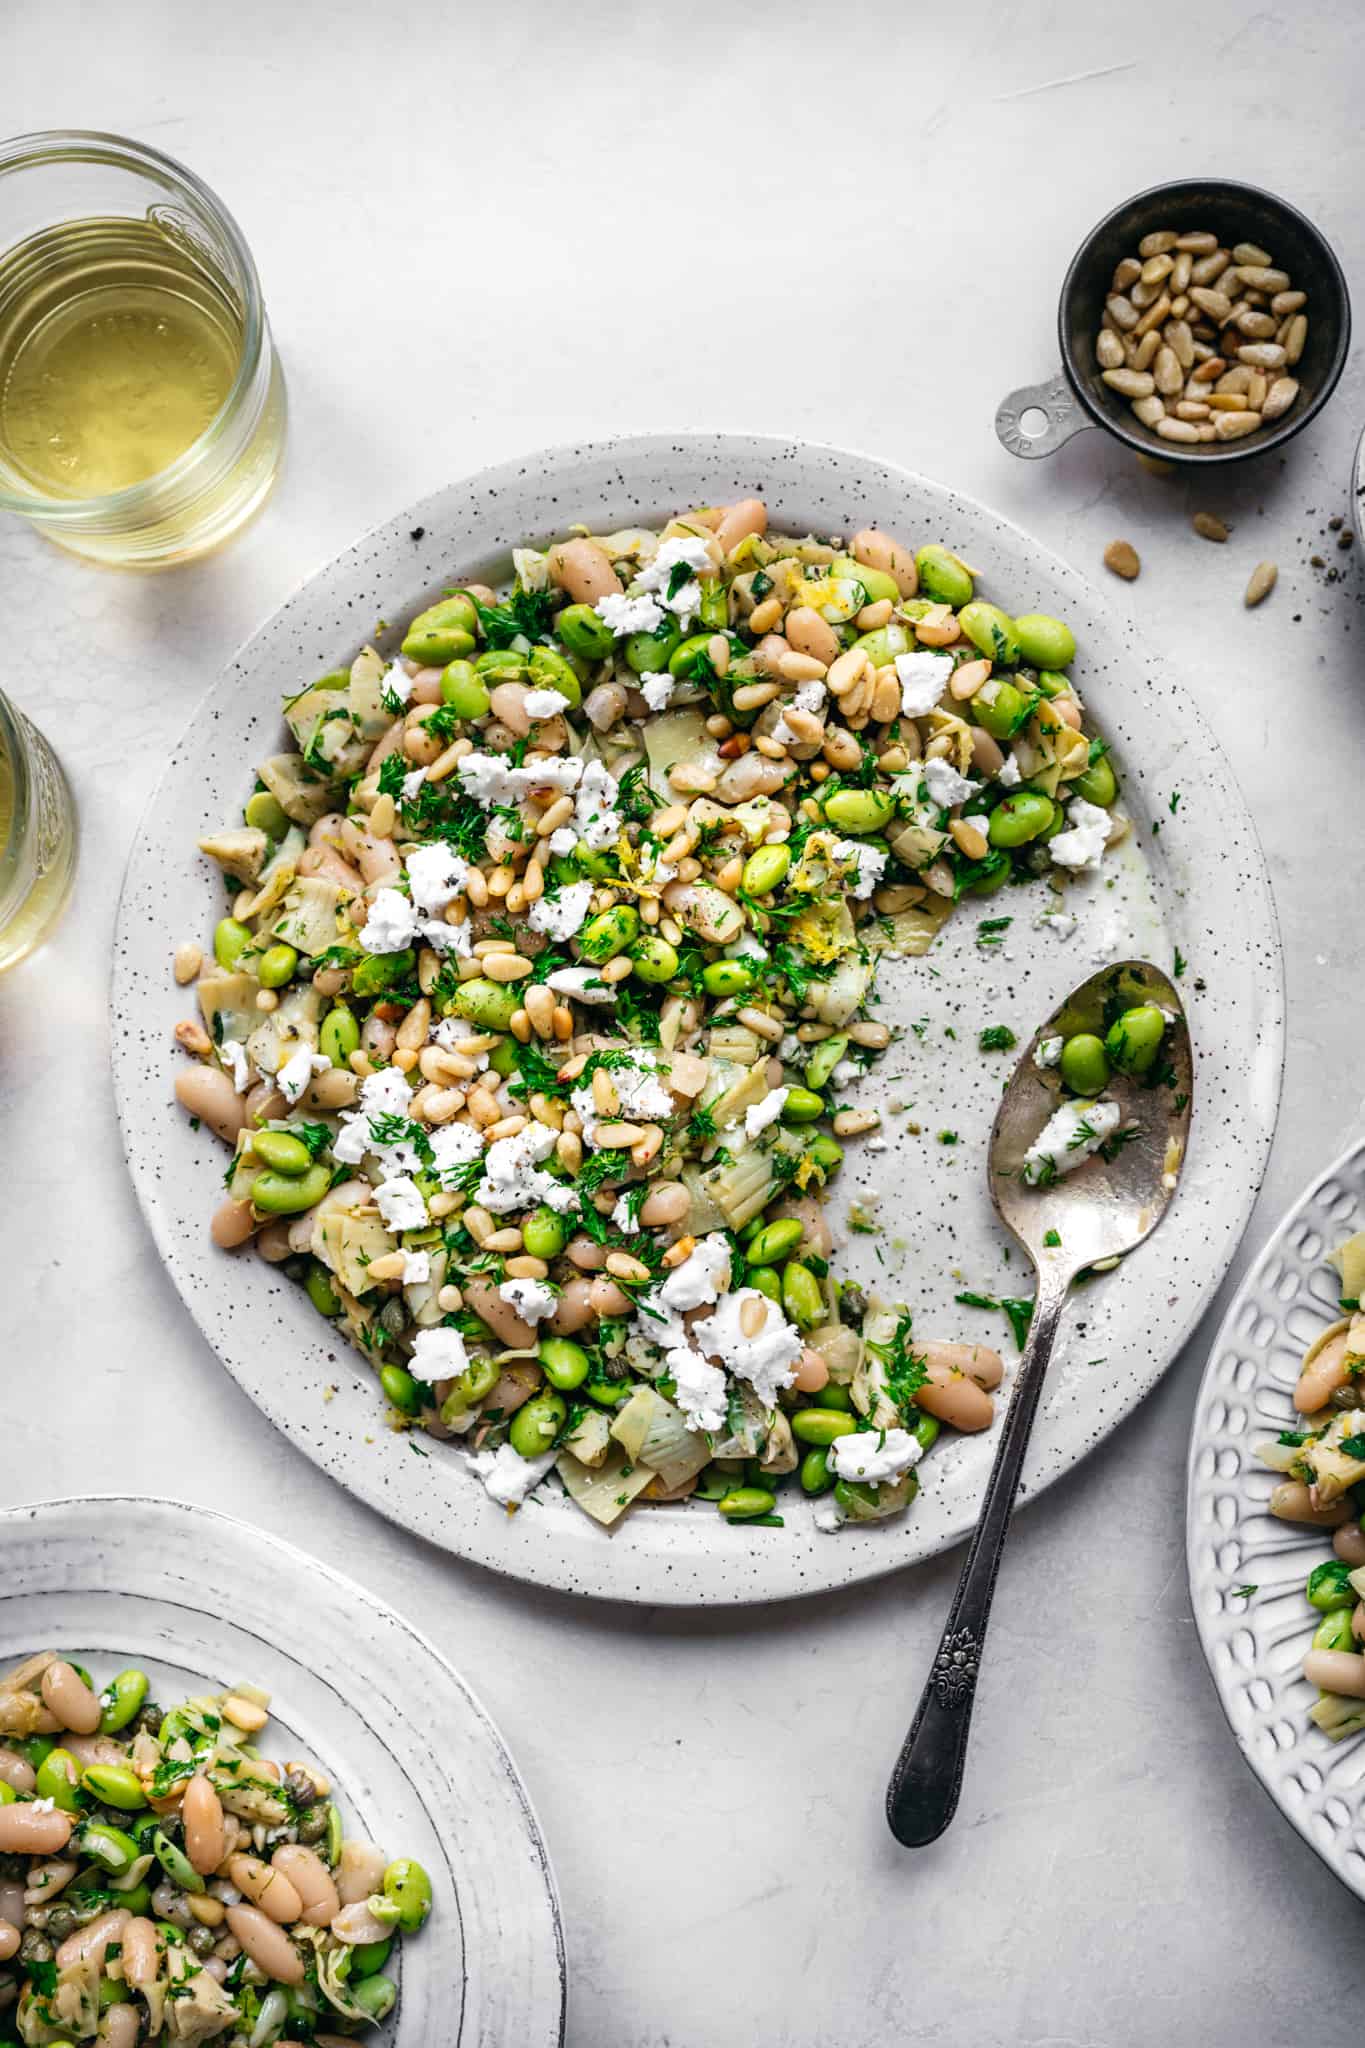 Overhead view of white bean salad with edamame, artichokes, pine nuts and feta on a white plate with serving spoon.